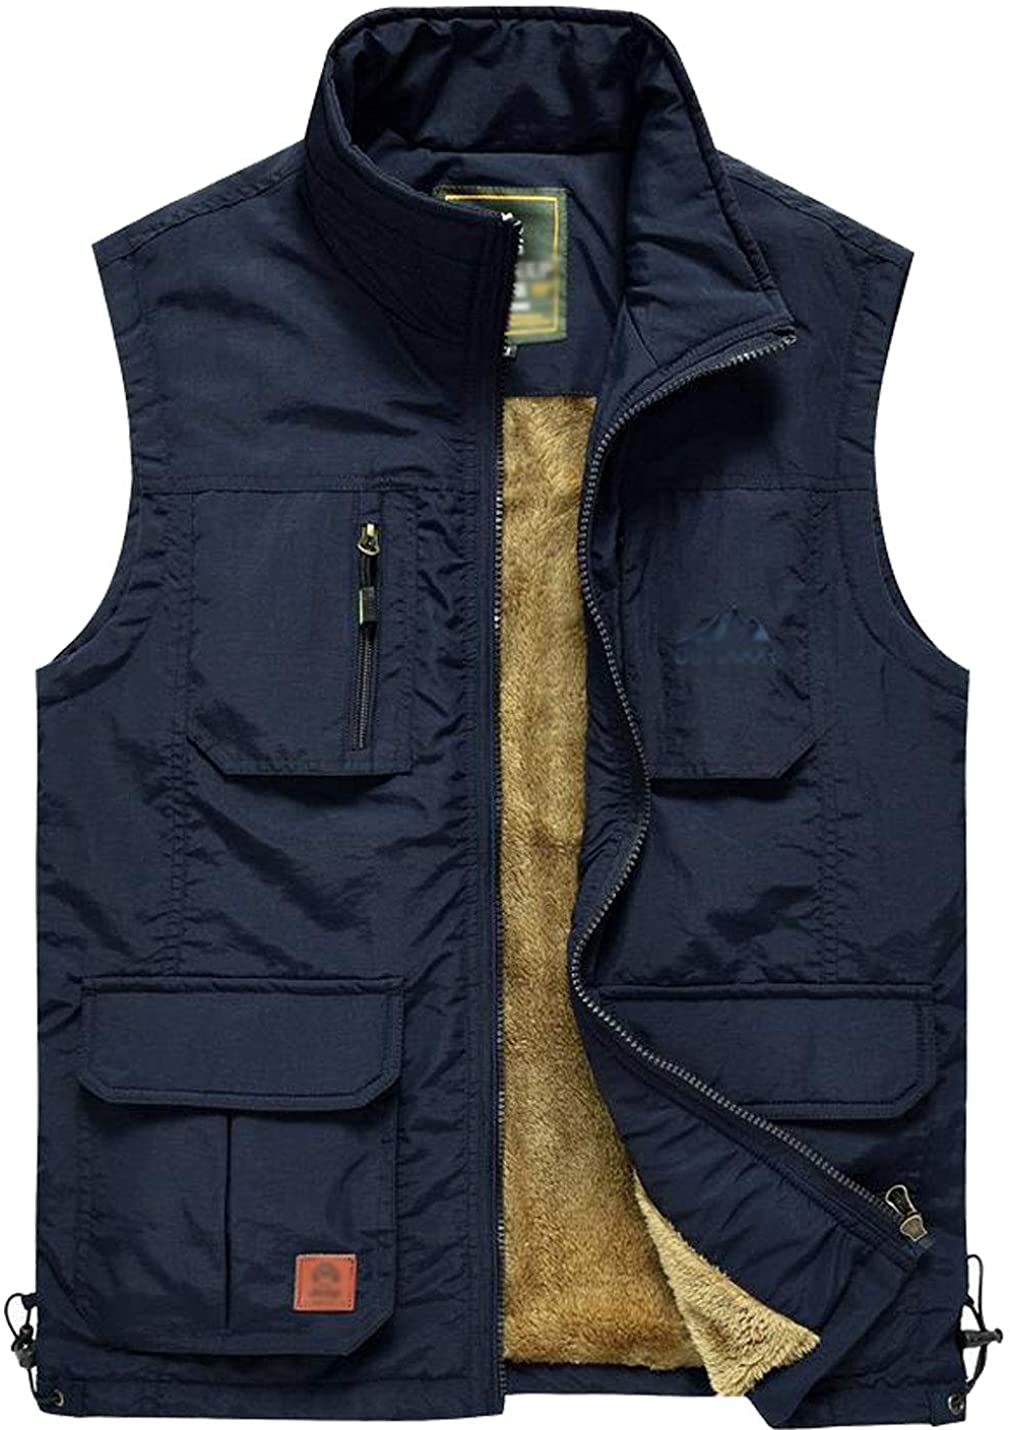 Flygo Men's Casual Lightweight Outdoor Travel Fishing Hunting Vest Jacket  with P